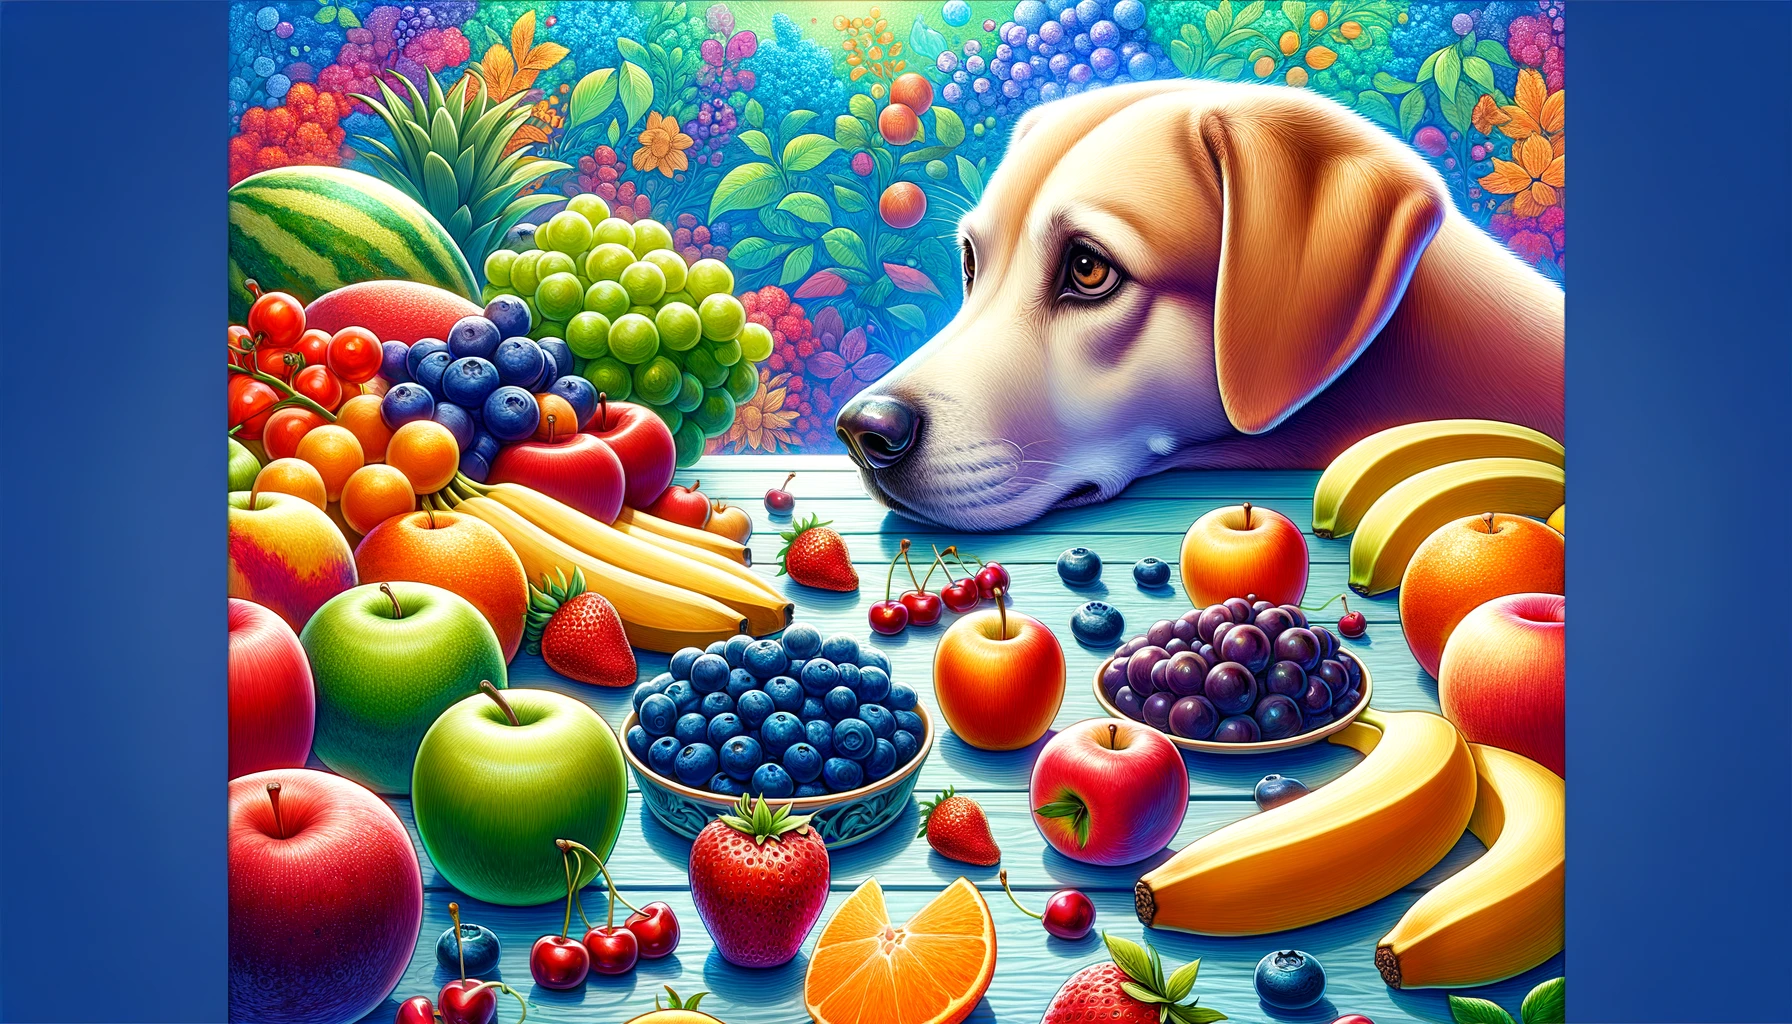 dog gazing at a table filled with a colorful assortment of fruits